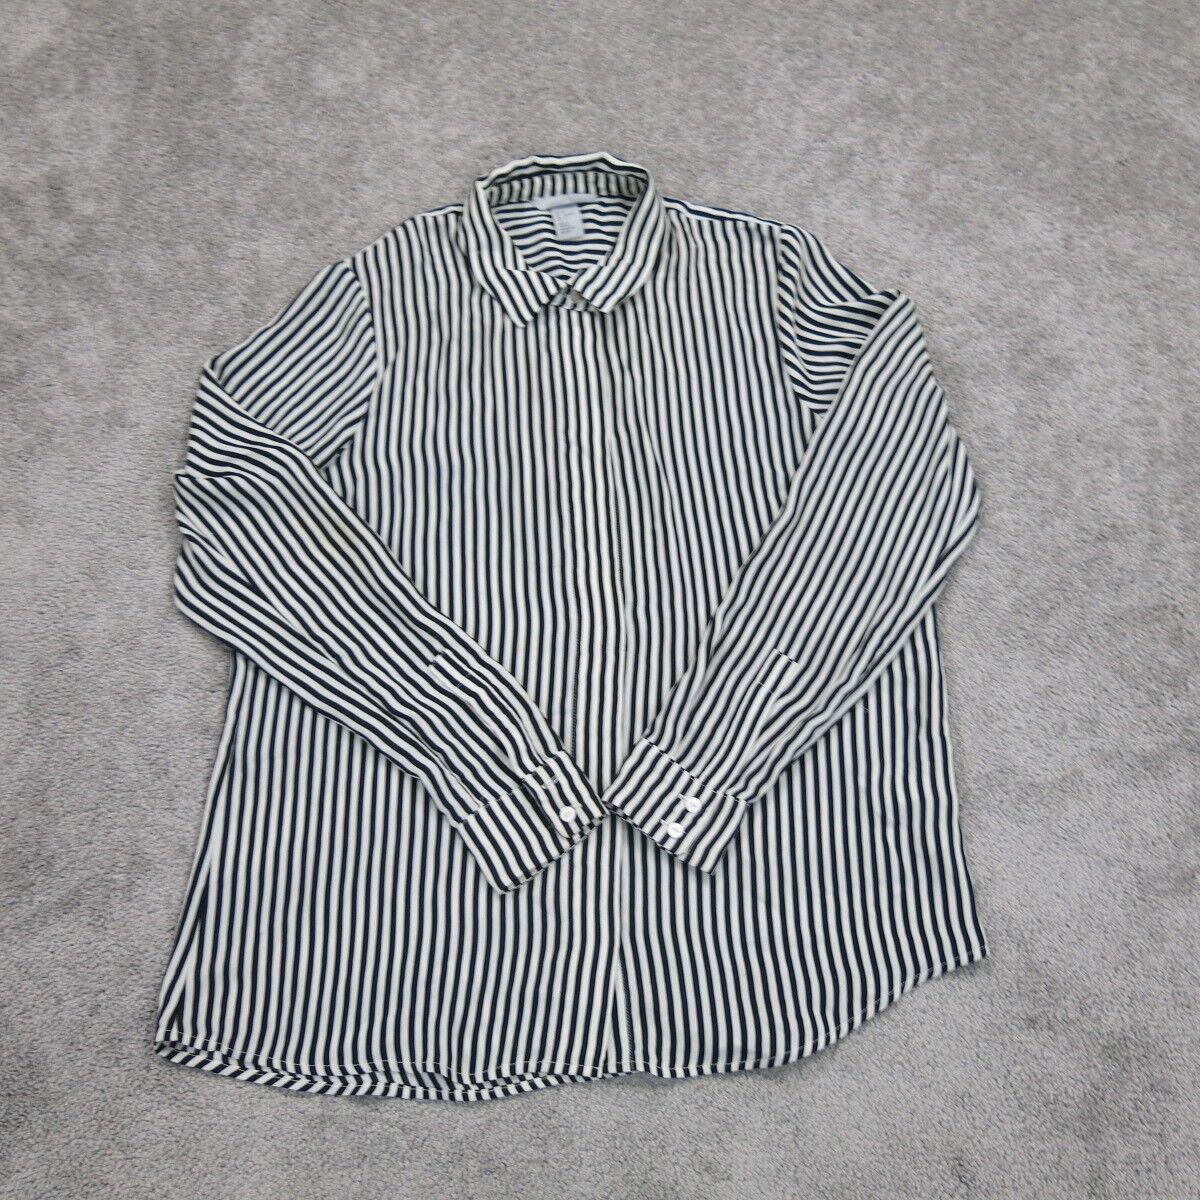 H&M Womens Striped Button Up Shirt Top Long Sleeve Collared Black White Size 8